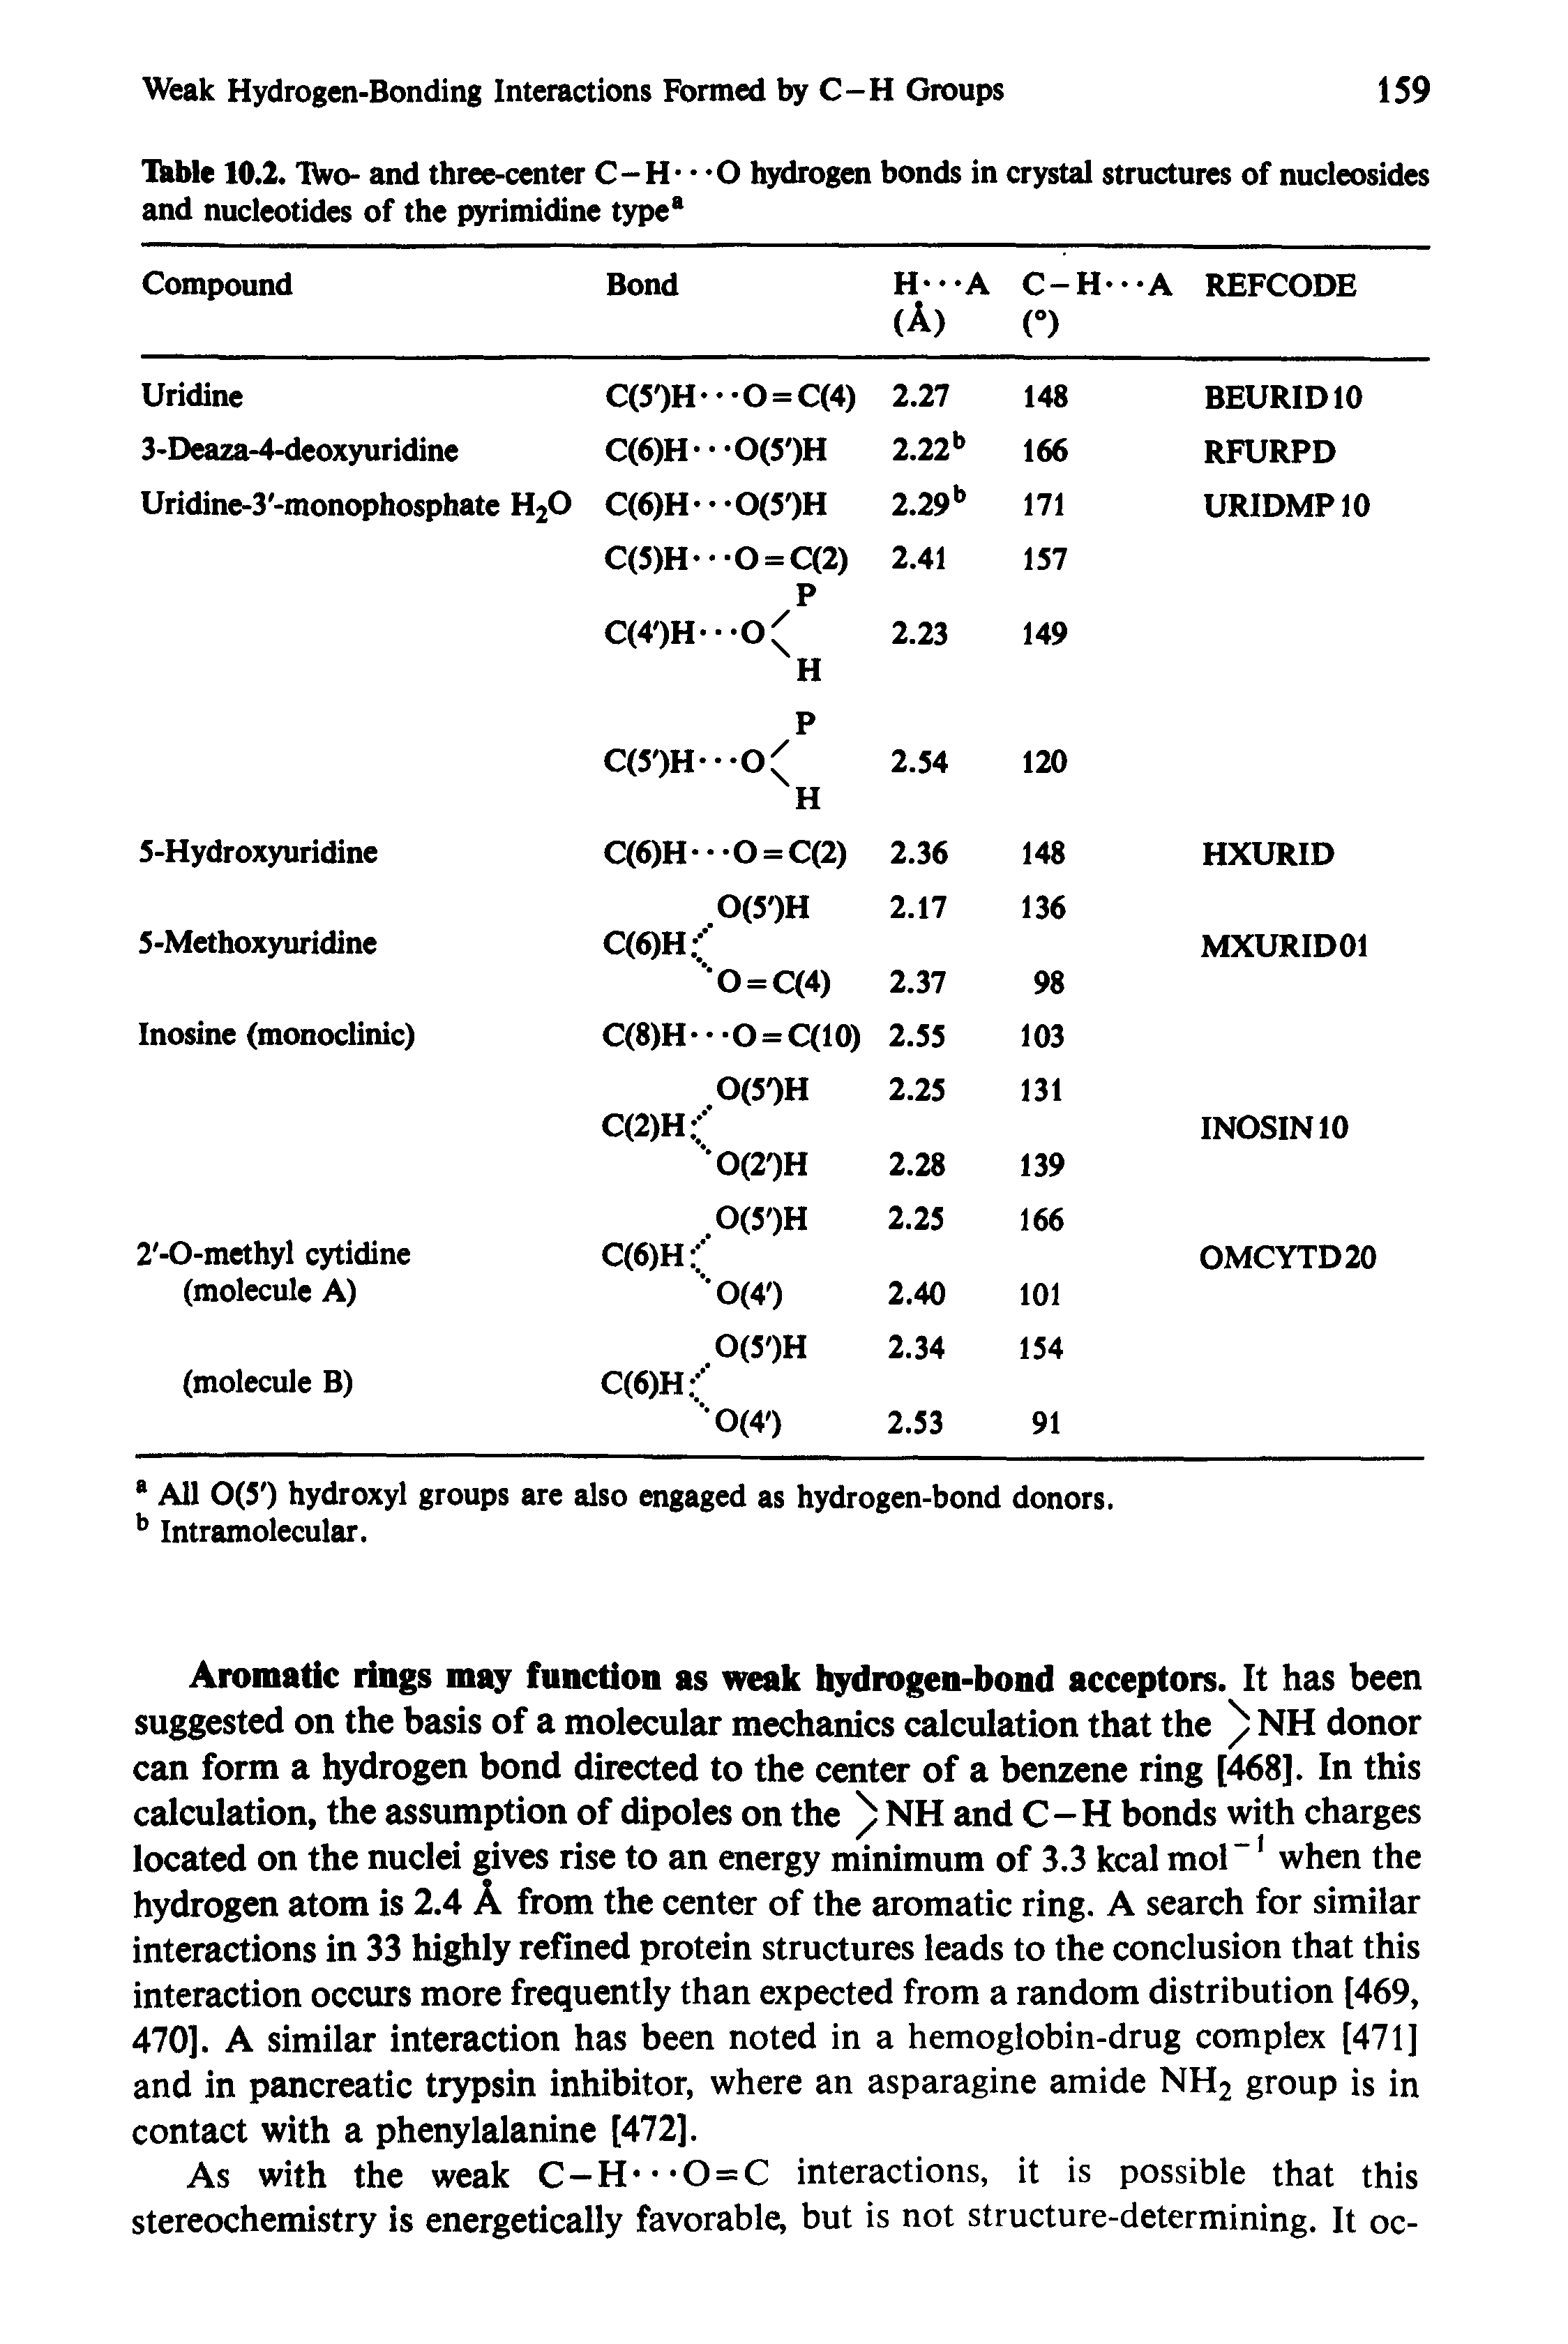 Table 10.2. IWo- and three-center C-H" 0 hydrogen bonds in crystal structures of nucleosides and nucleotides of the pyrimidine typea...